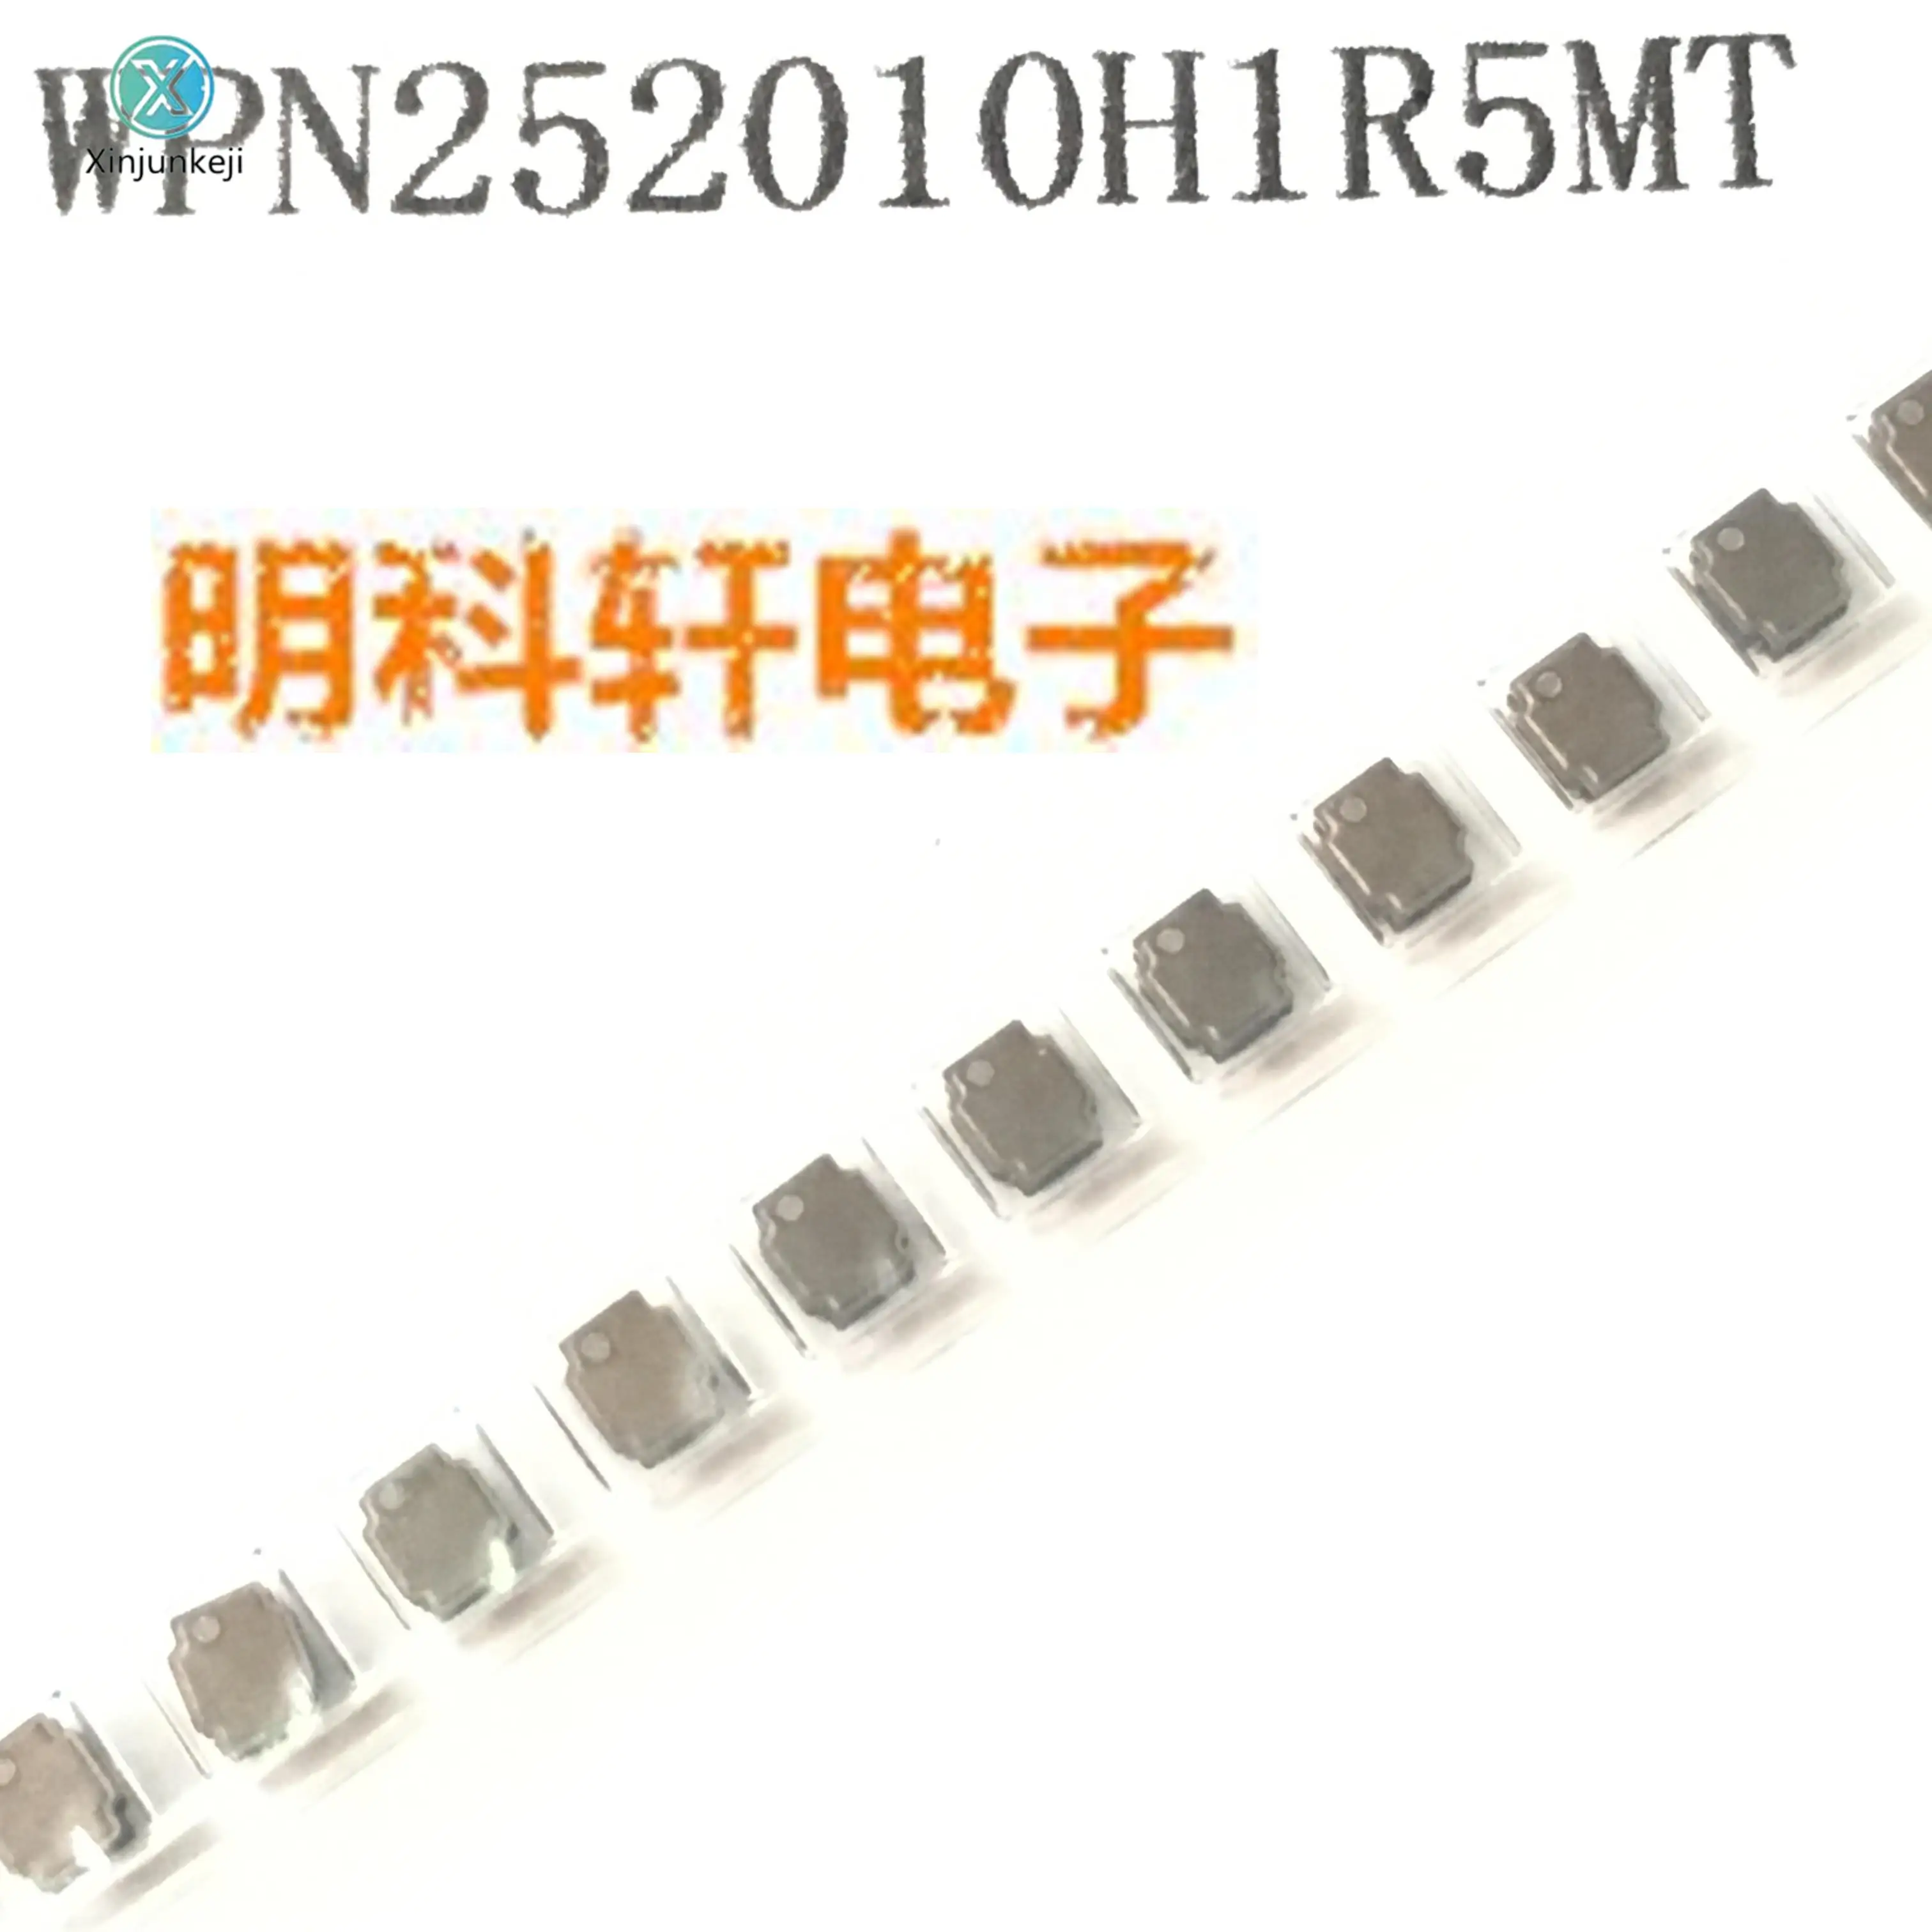 

30pcs orginal new WPN252010H1R5MT SMD Wound Power Inductor 1.5UH 2.5*2.0*1.0 ±20%